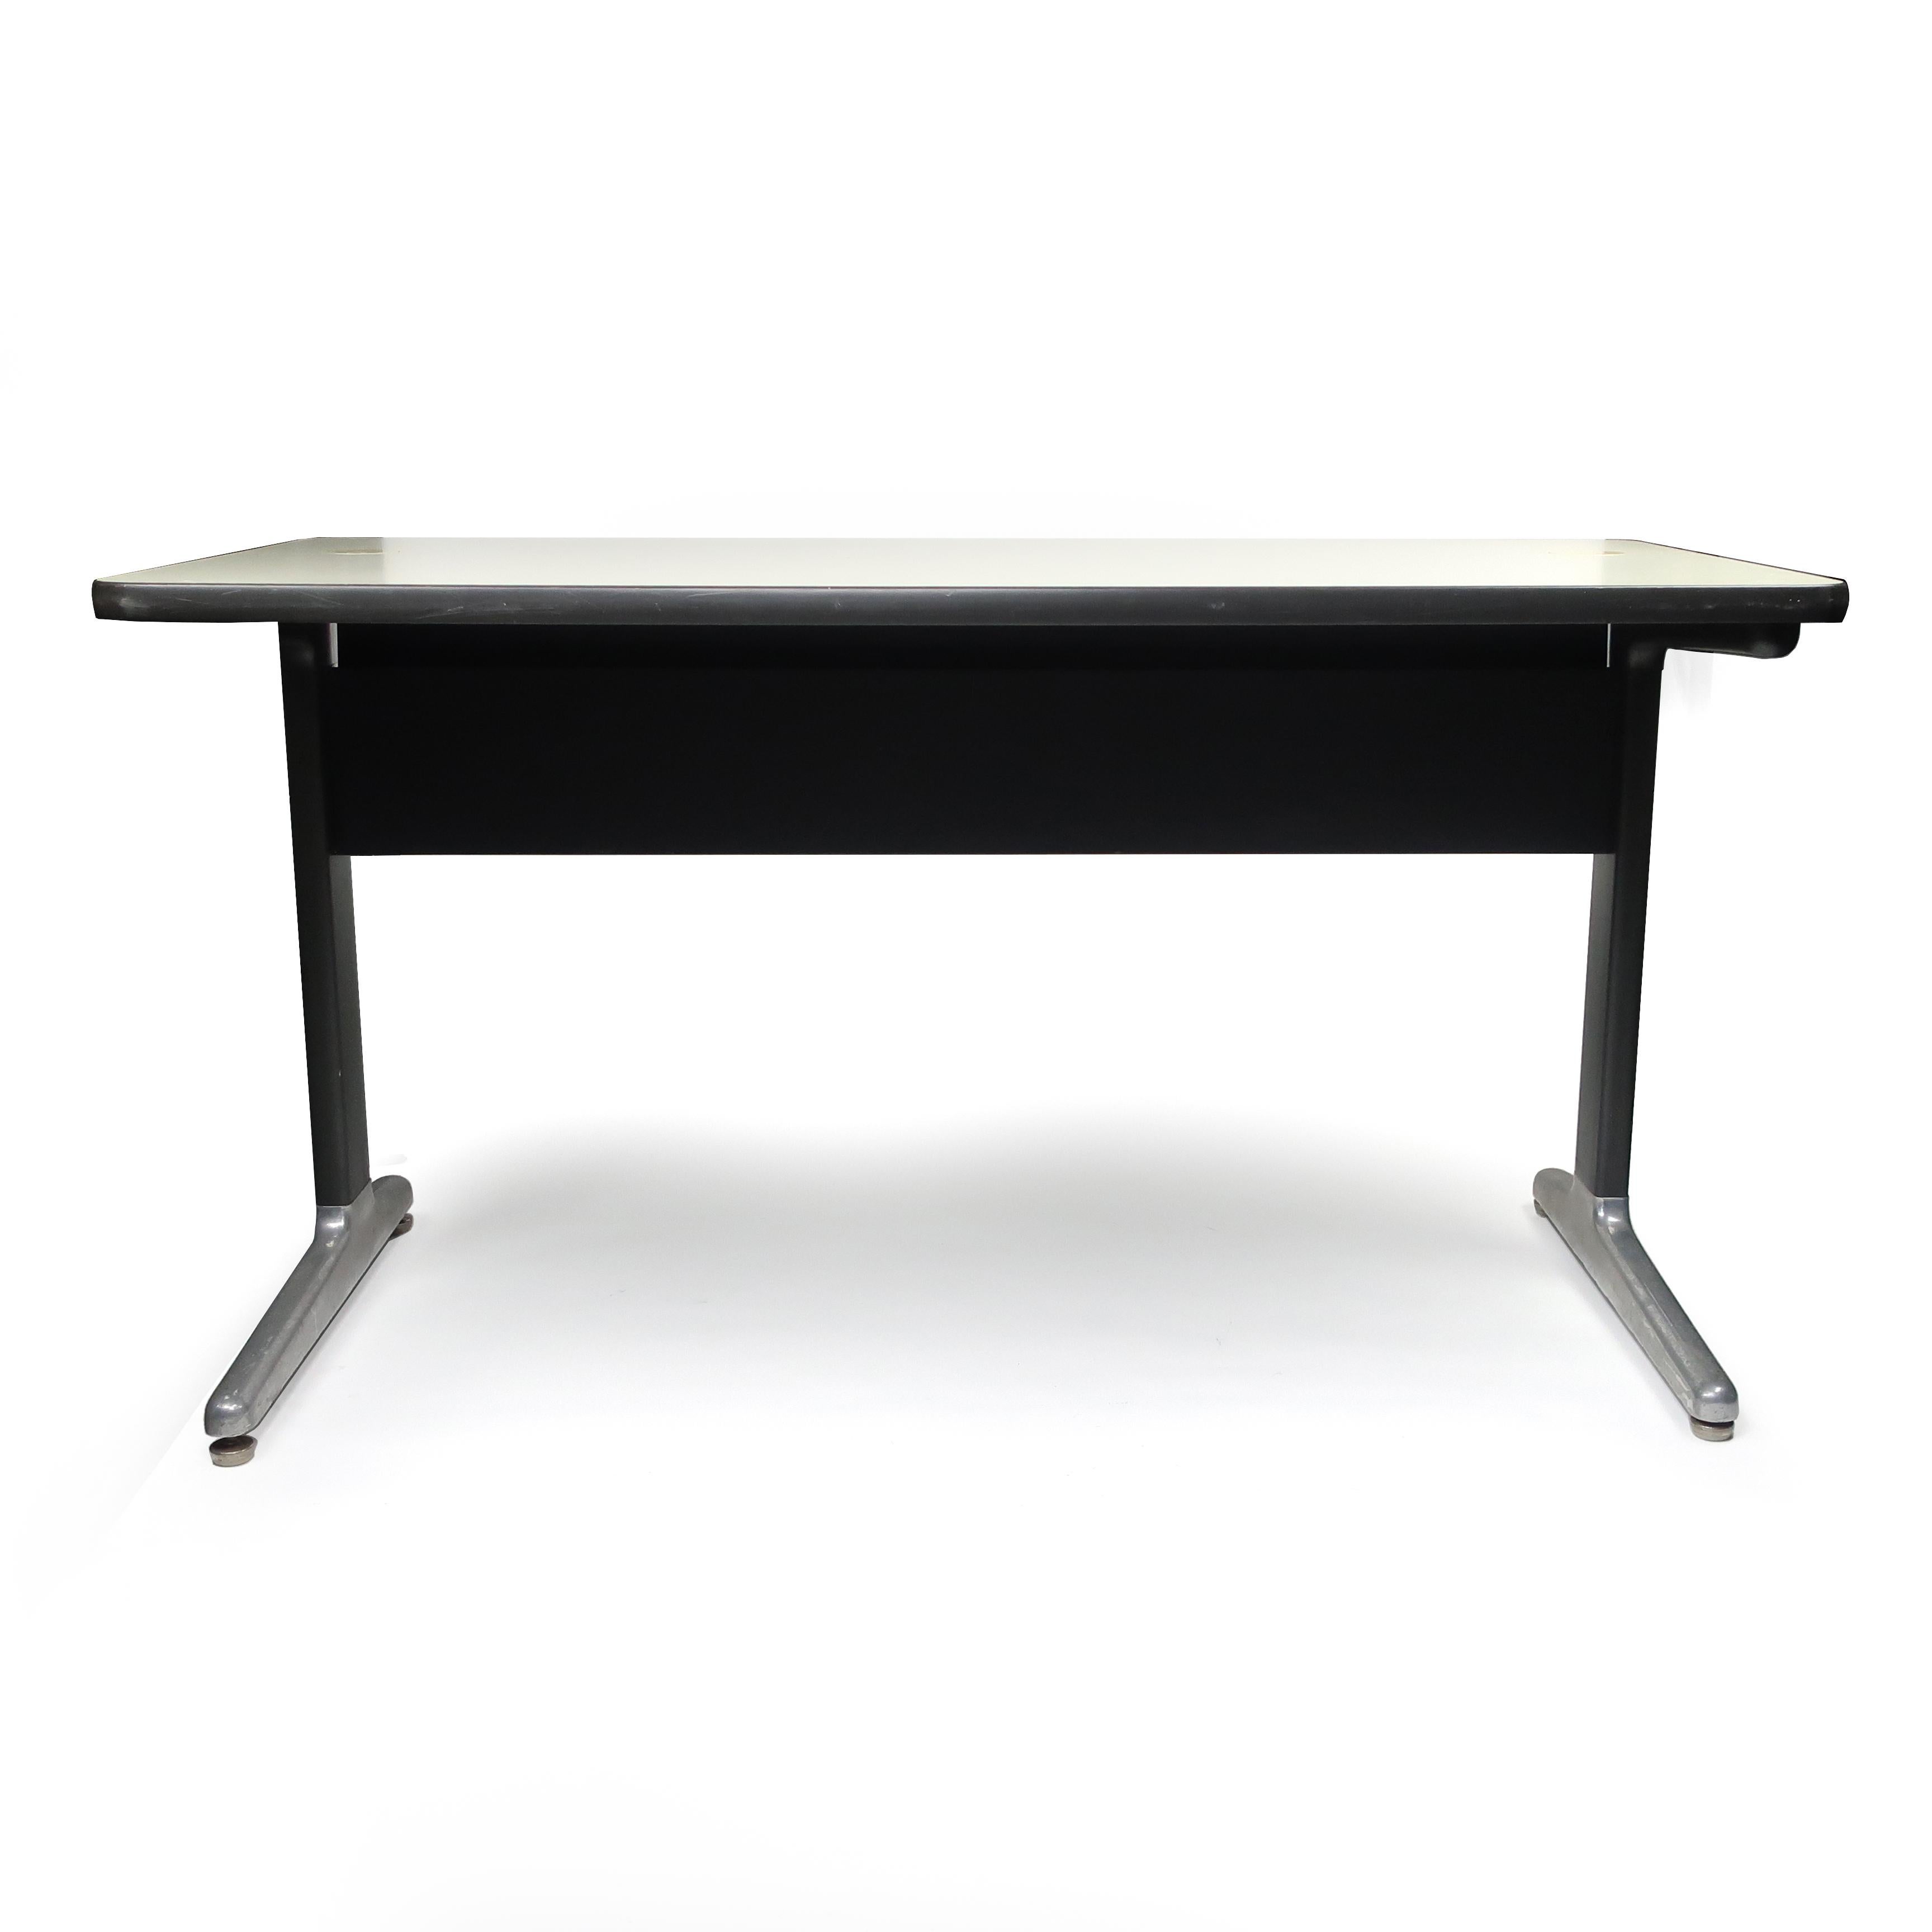 A Classic 1970s Mid-Century Modern desk produced by Herman Miller. Off-white laminate top on black metal base with cast aluminum feet, and includes a black modesty panel and holes to run cables from tabletop devices. Very similar in design to Eames’